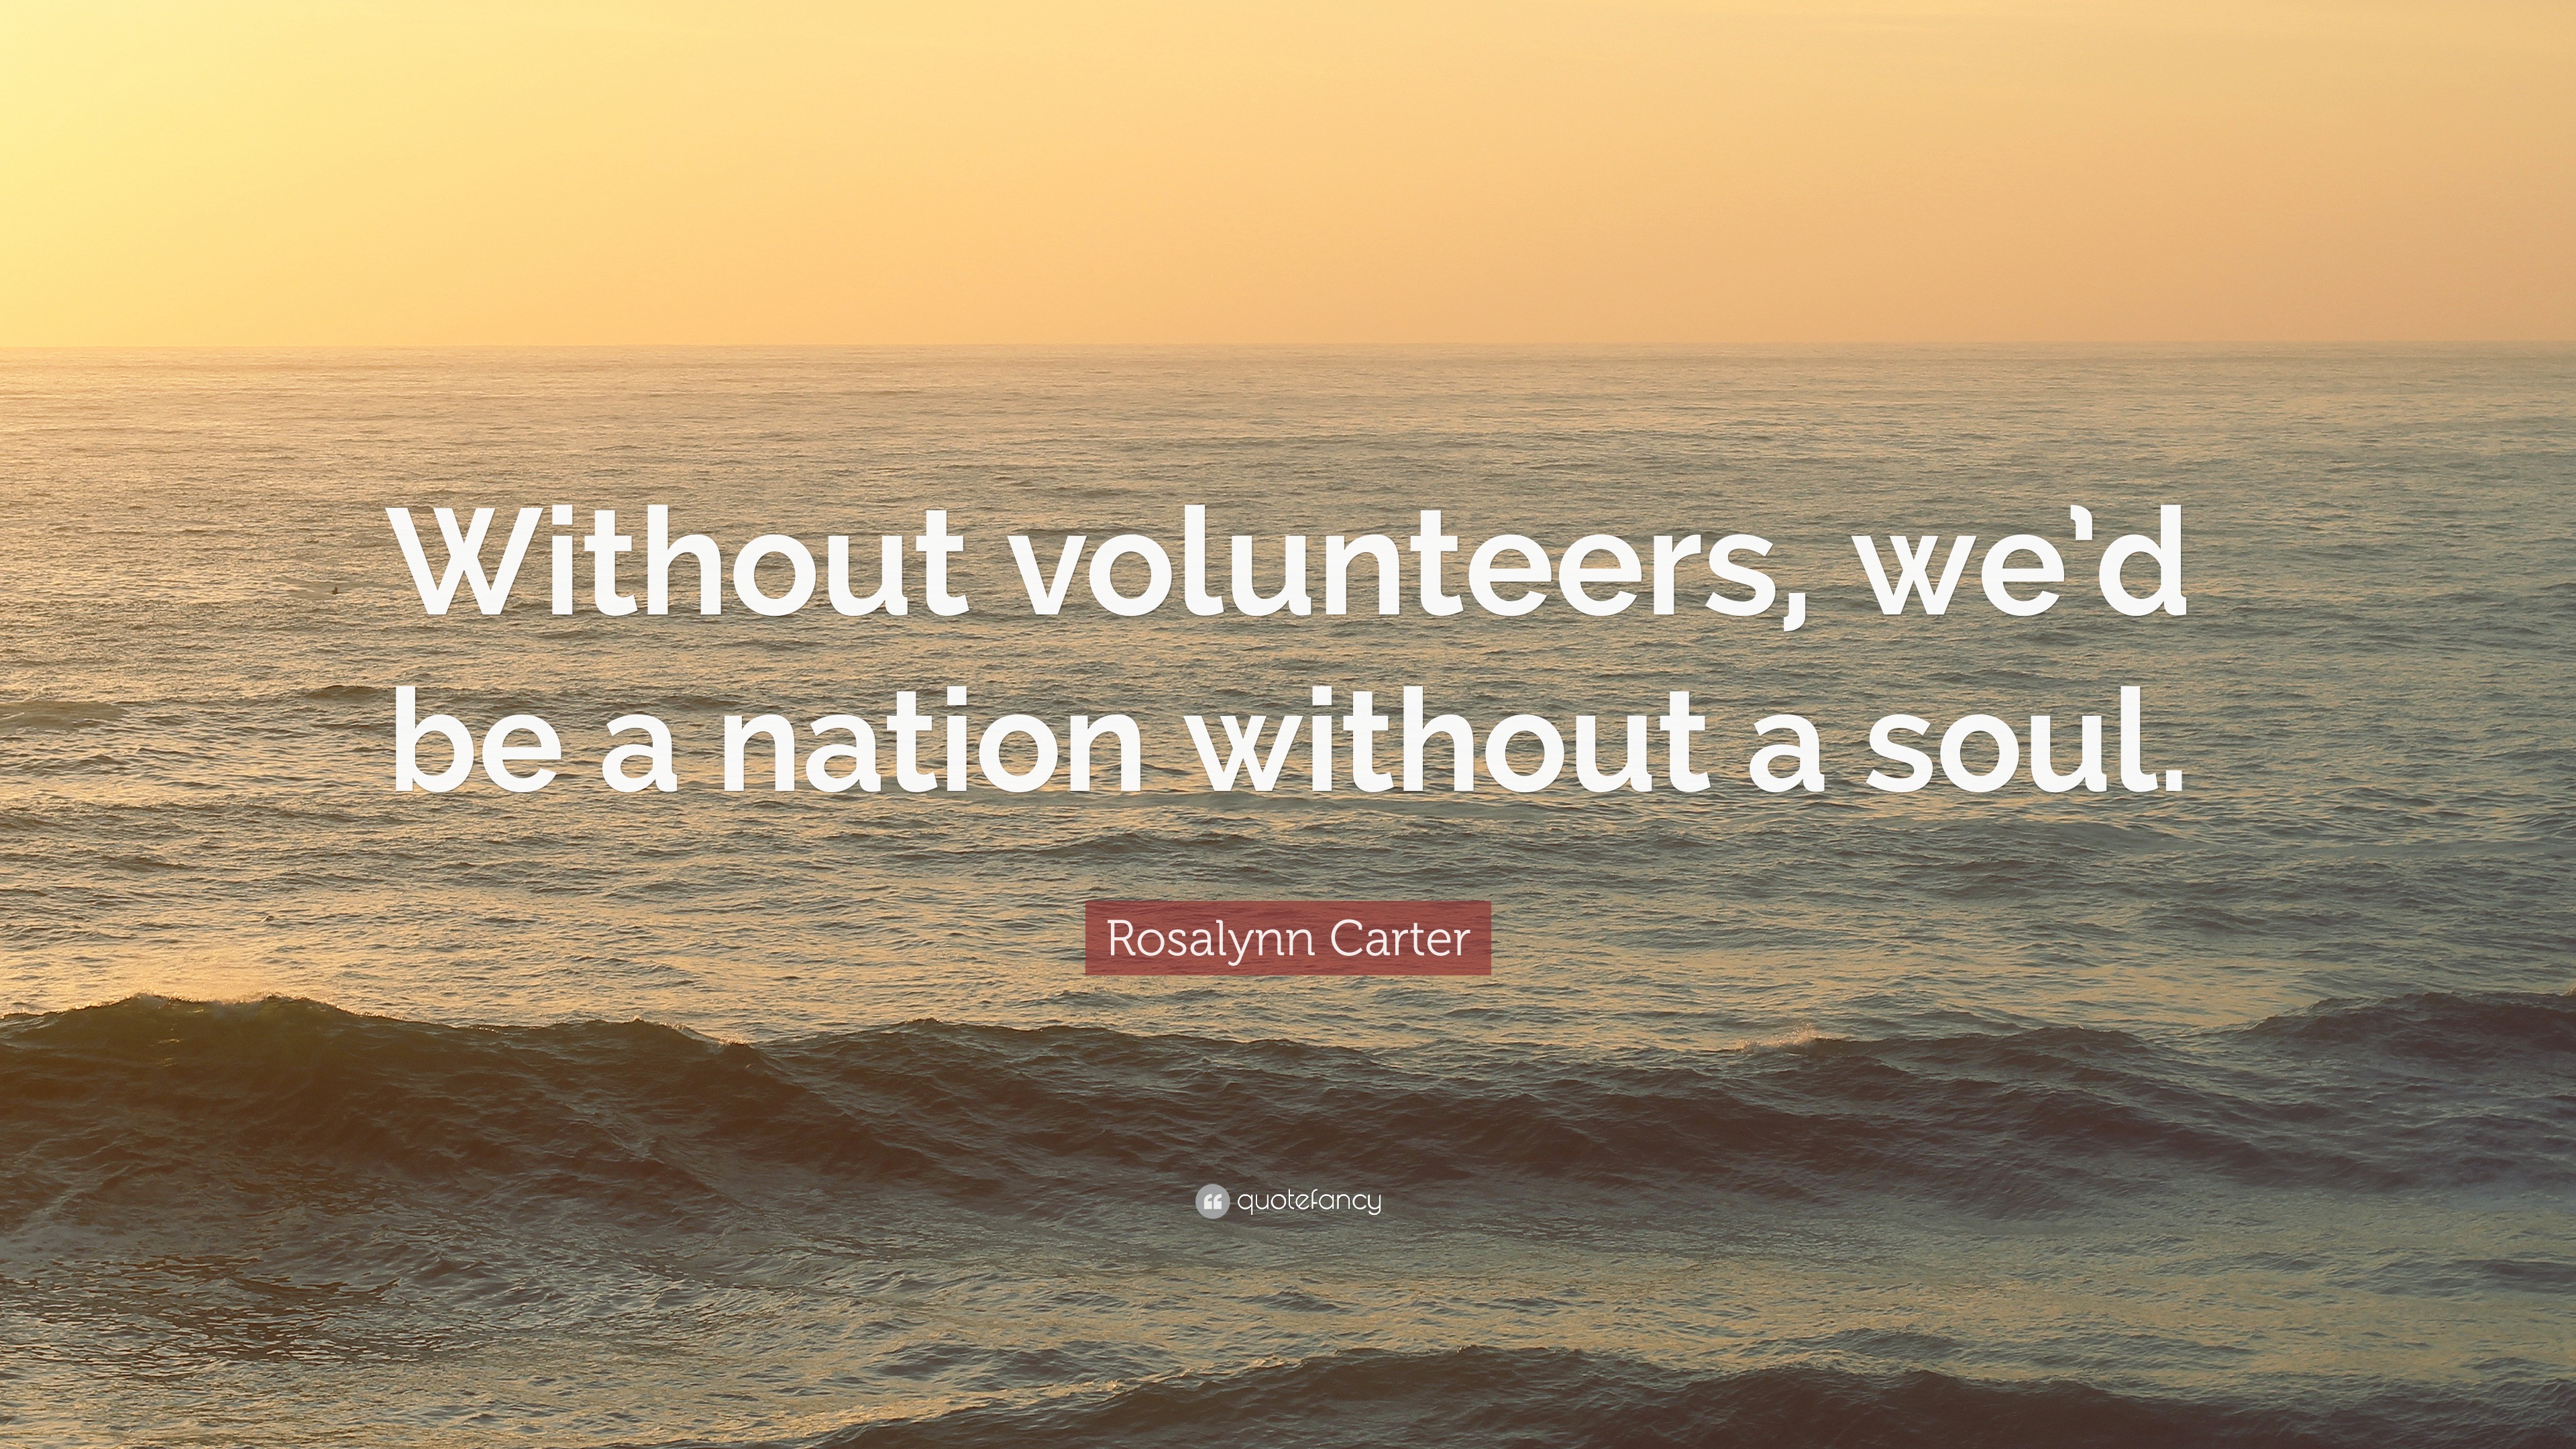 Rosalynn Carter Quote: “Without volunteers, we’d be a nation without a